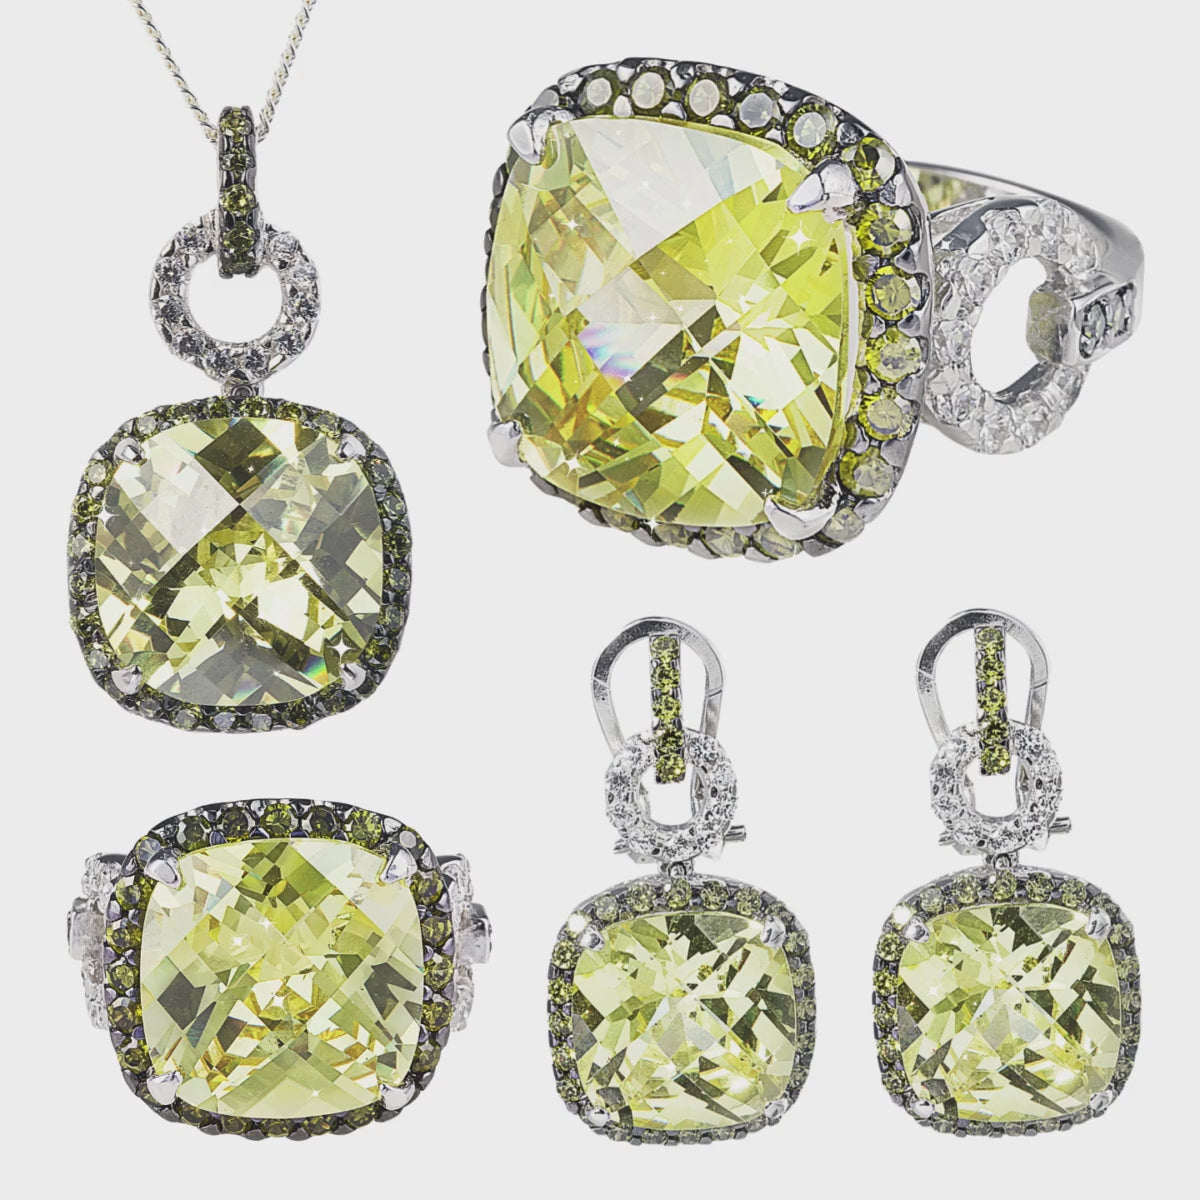 Antique Style 925 Sterling Silver necklace, ring and earring collection featuring a stunning Green Peridot stone surrounded by dainty black Cubic Zirconia Stones. Taylor Vintage Jewellery Collection by Bellagio & Co. Worldwide shipping from Australia.